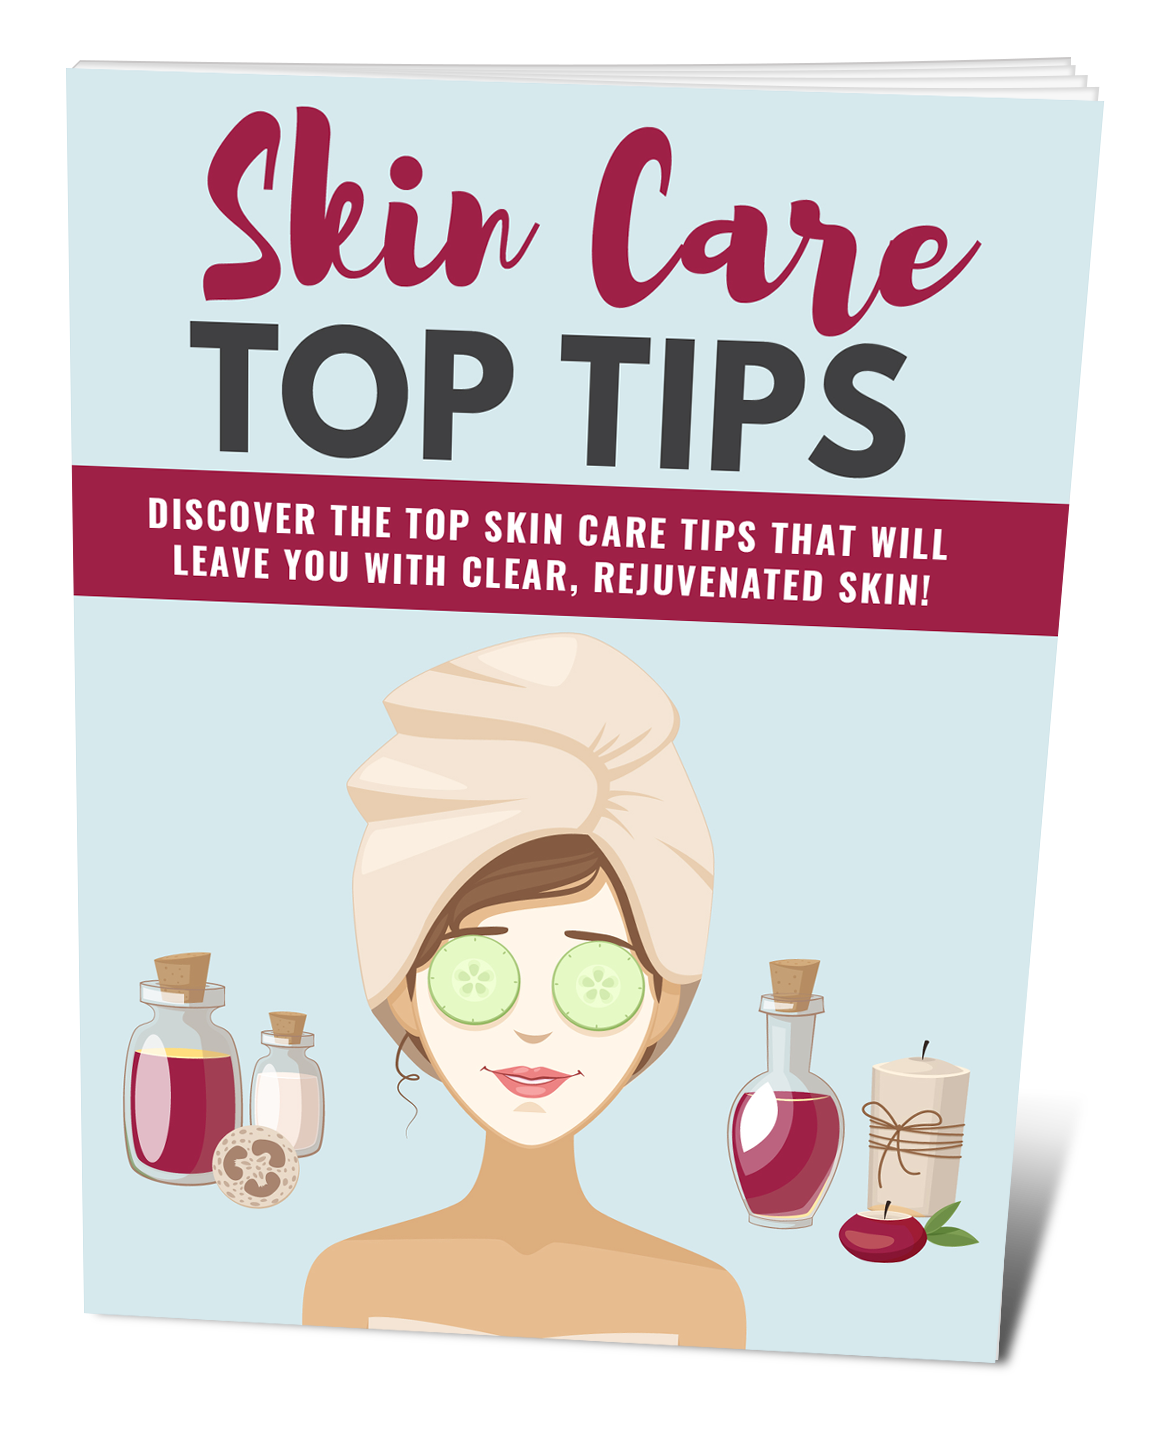 Skincare Top Tips